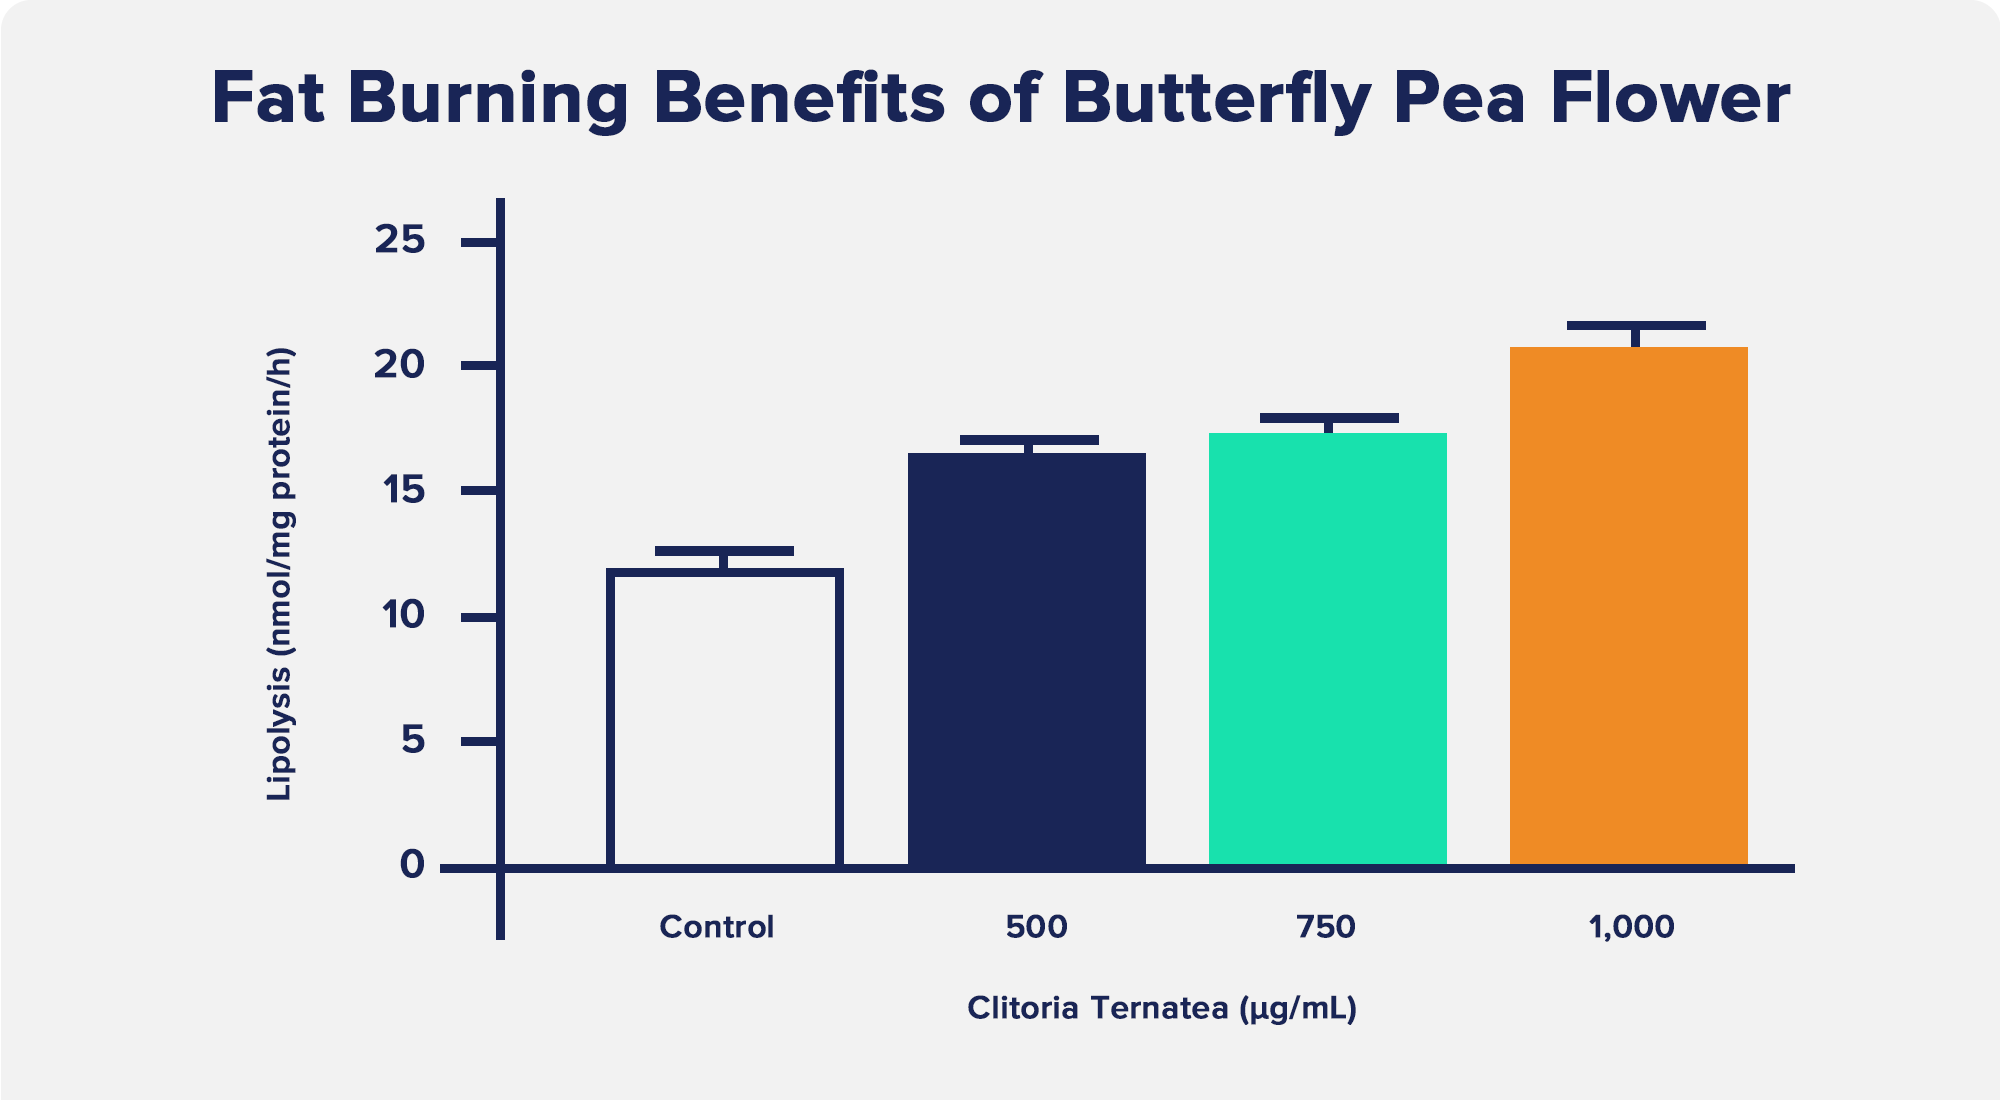 Fat Burning Benefits of Butterfly Pea Flower